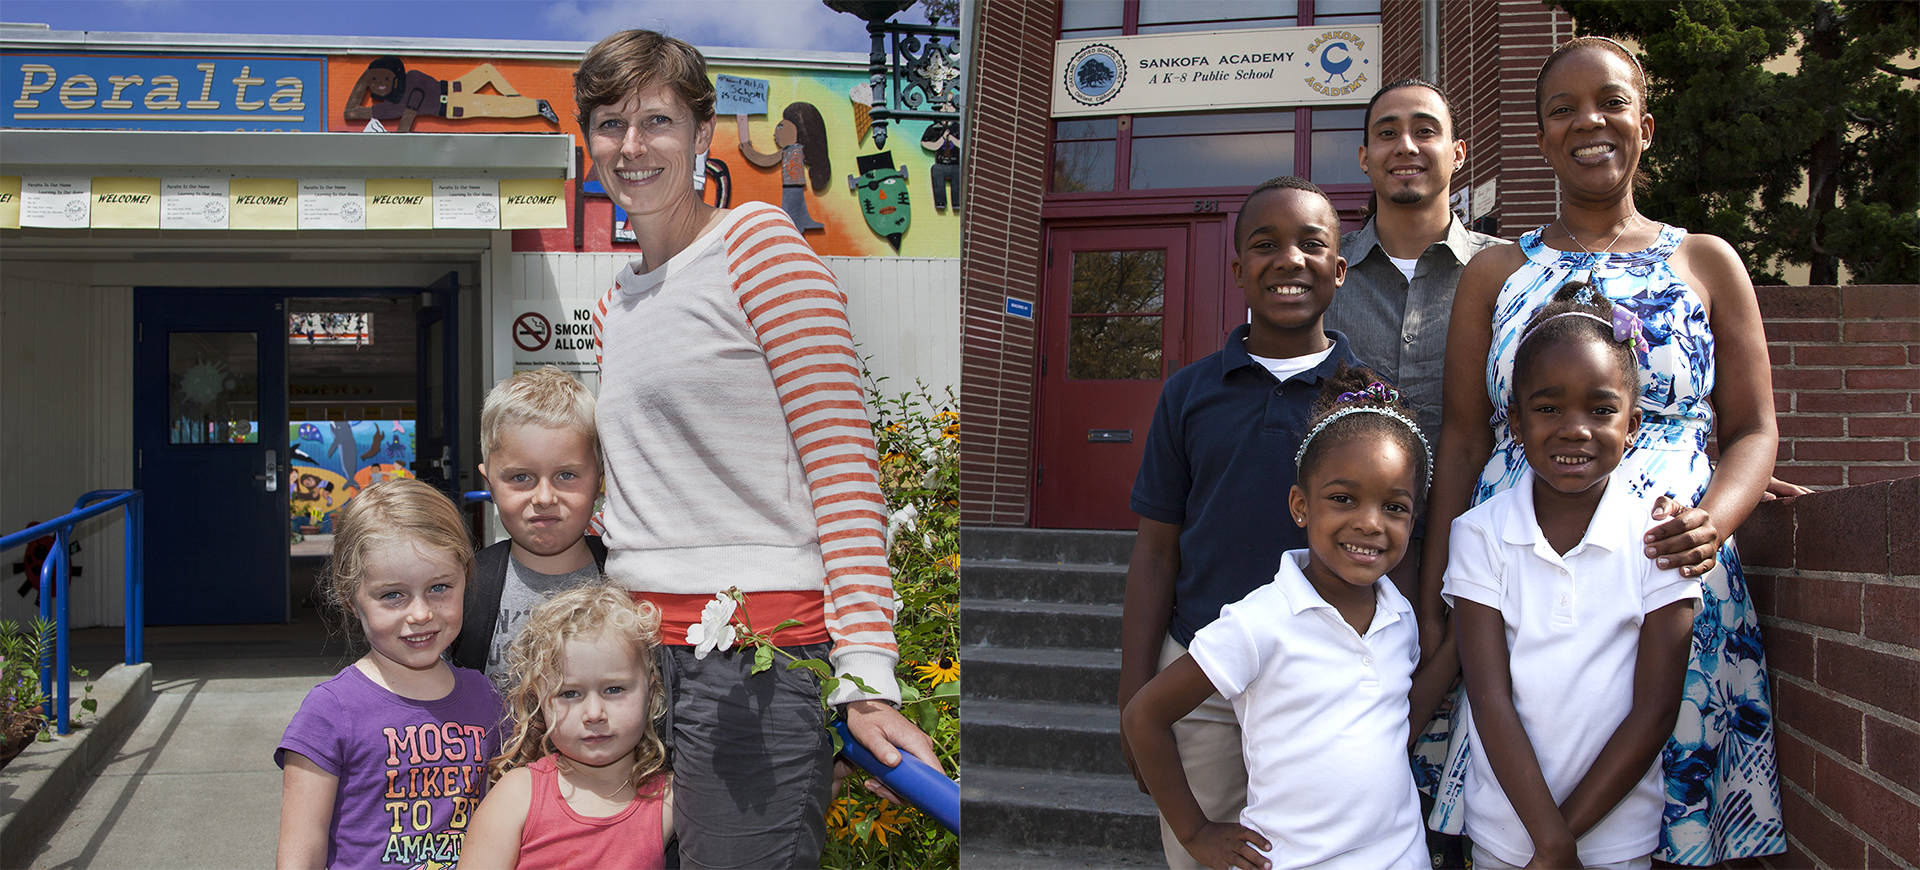 Left photo: Eleanor Wohlfeiler poses for a photo with her three children in front of Peralta Elementary School in Oakland. Right photo: Kristin Smith and her family outside Sankofa Academy in Oakland. Brittany Hosea-Small